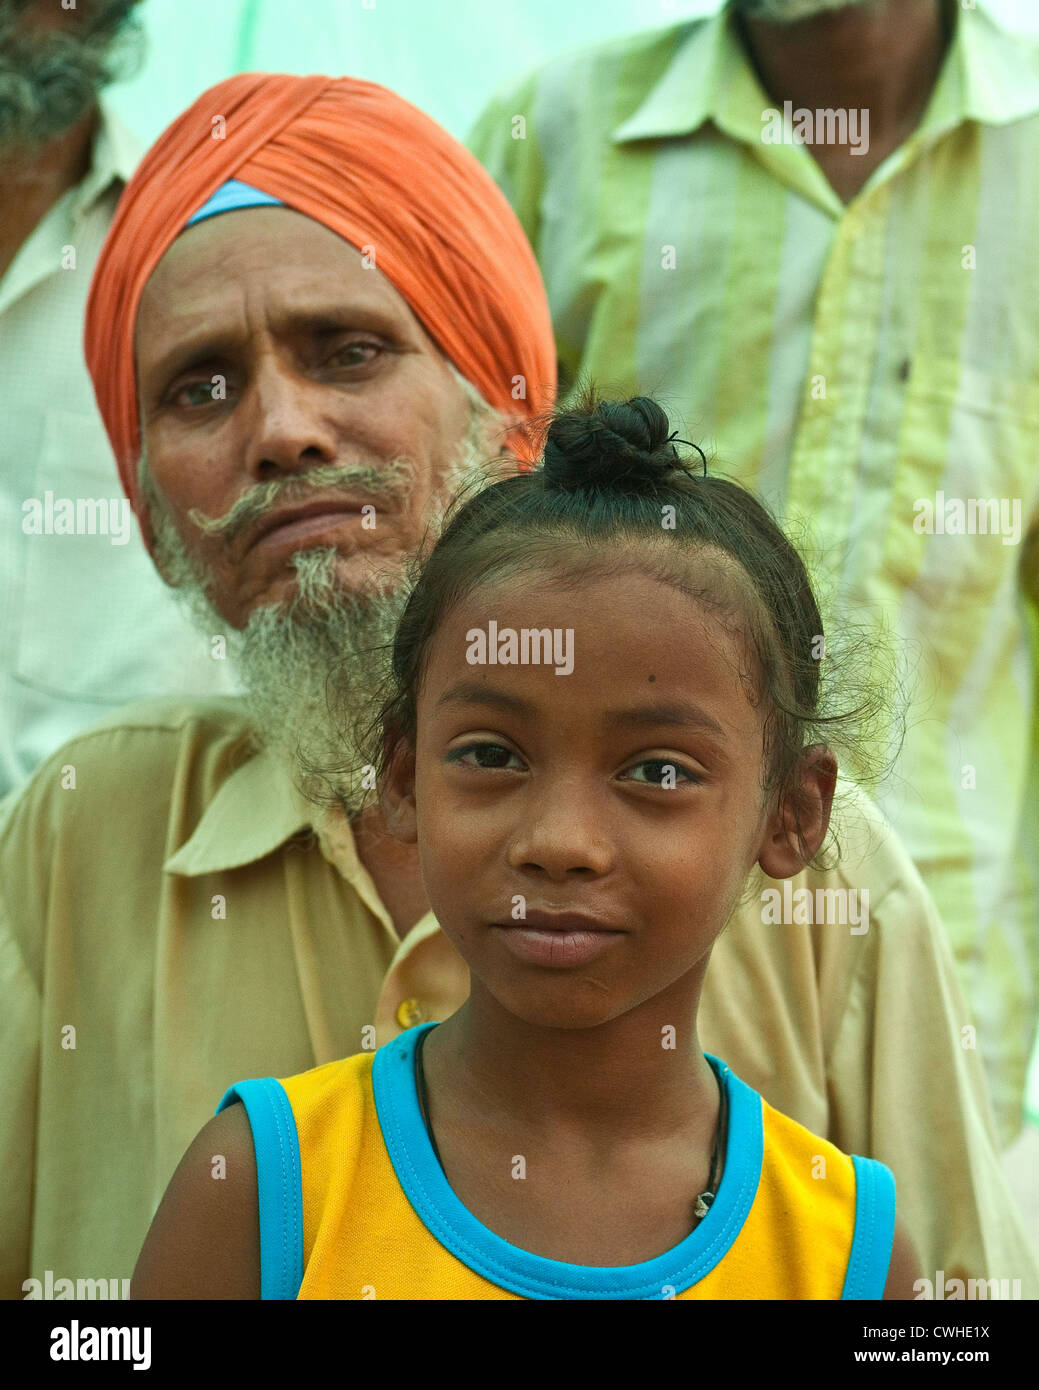 A young Sikh child with Sikh man Stock Photo